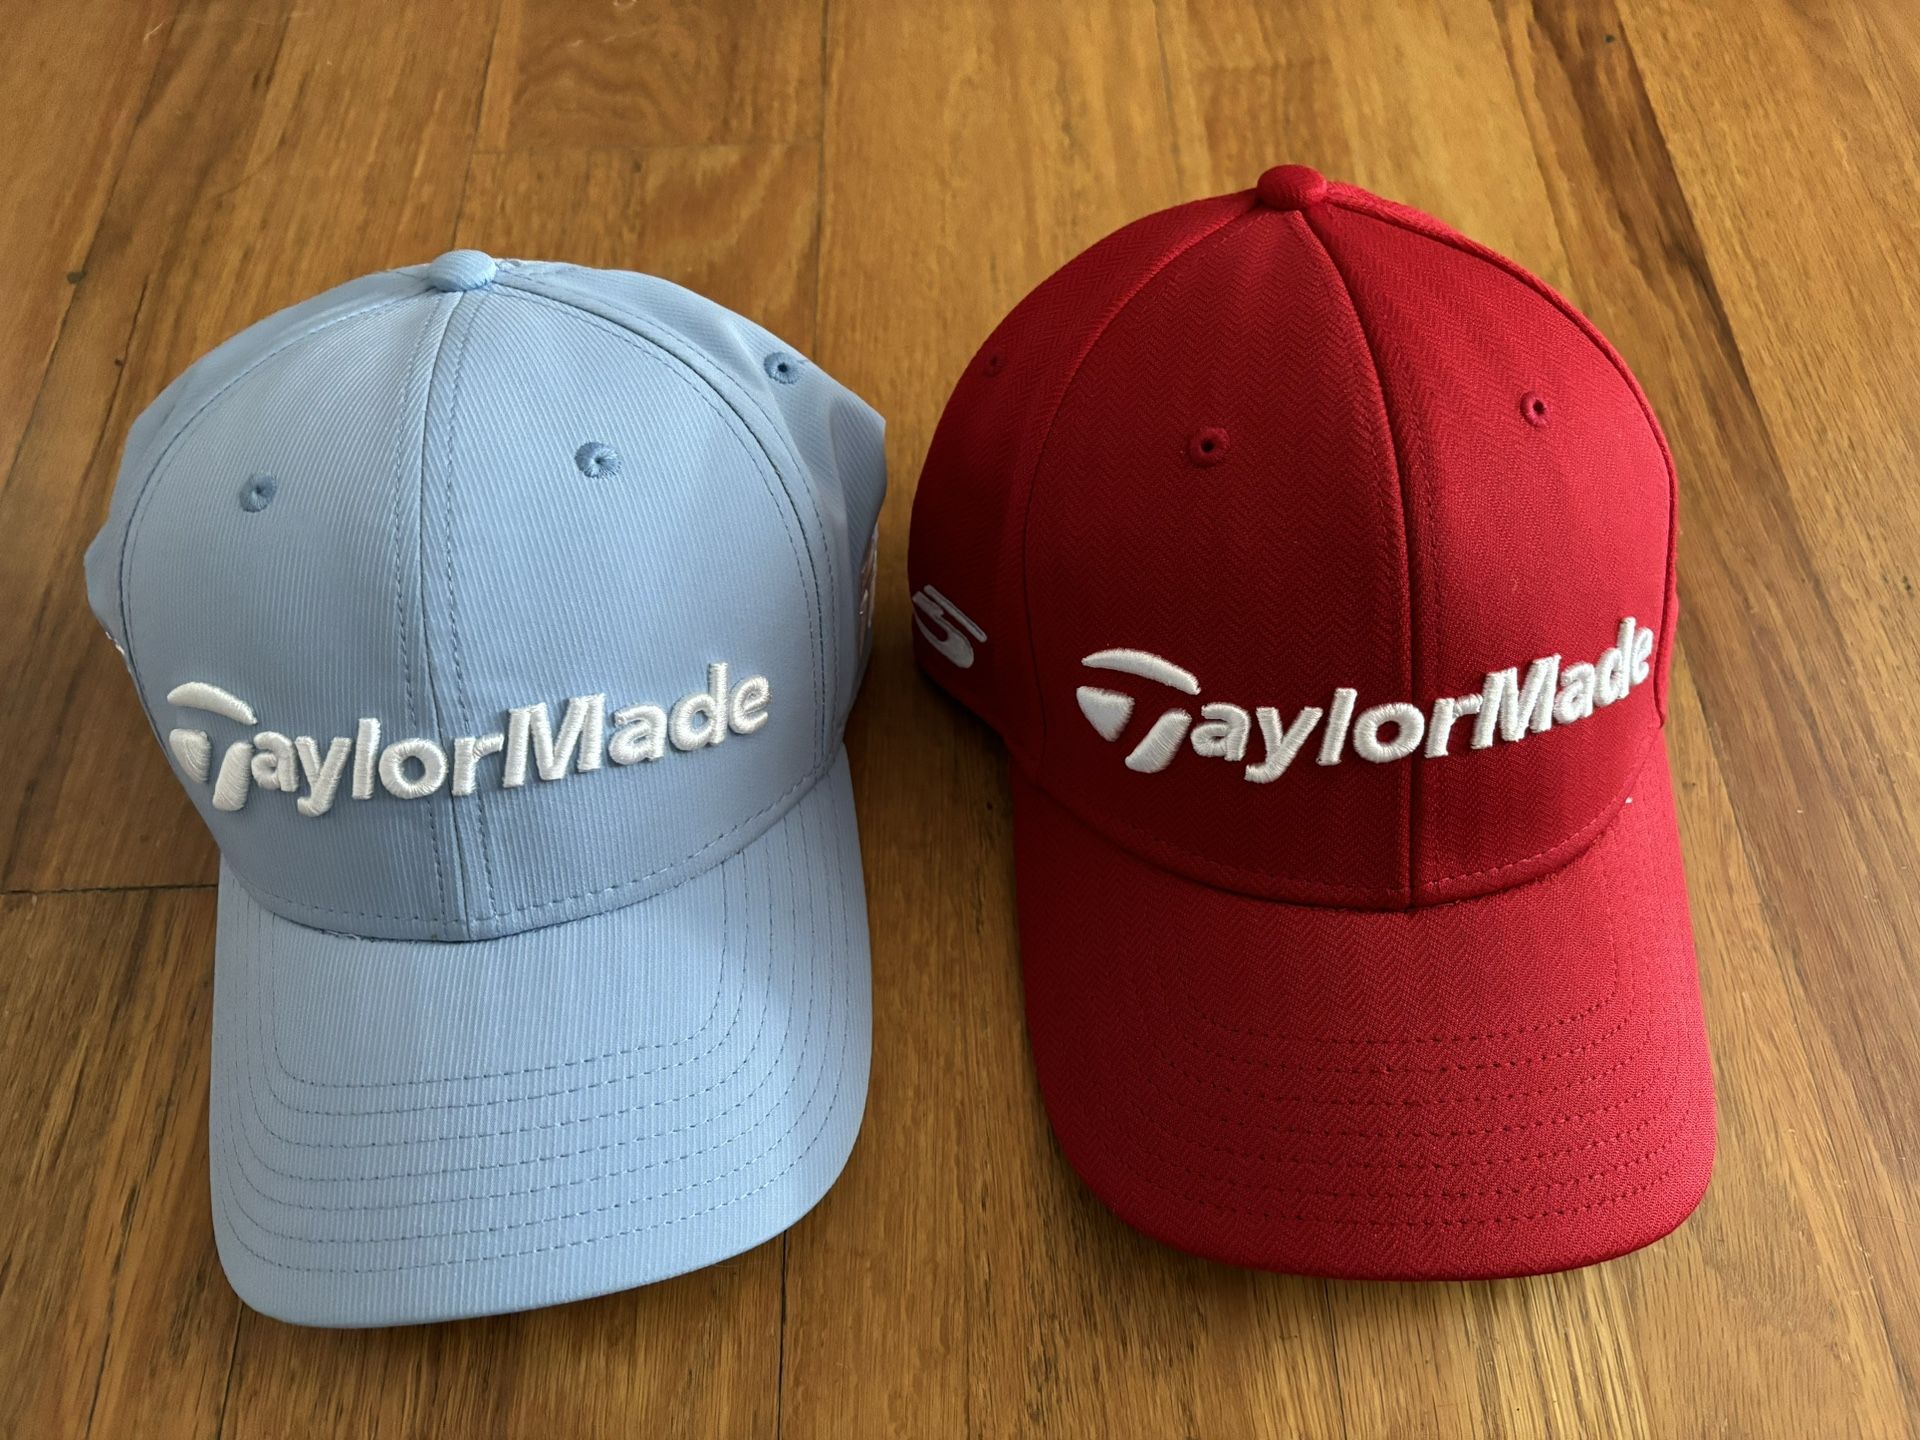 Taylor Made Golf Caps